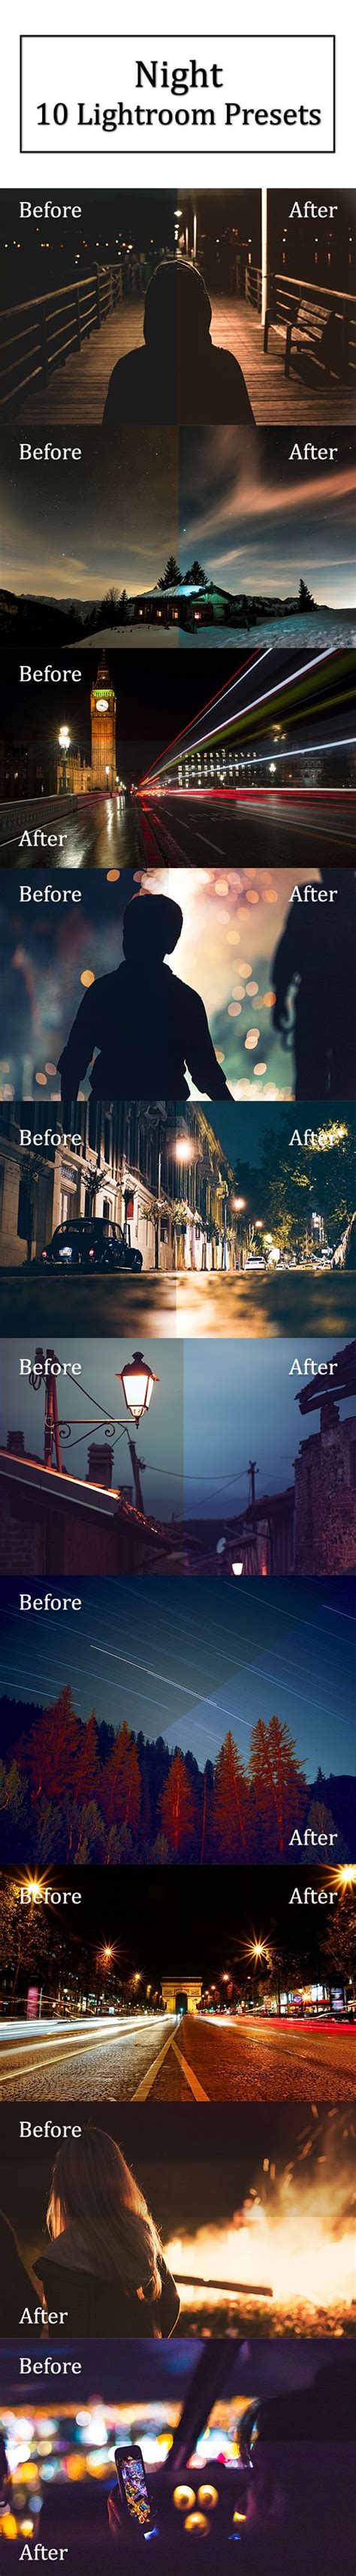 Low to high sort by. 10 Night Lightroom Presets | Lightroom presets, Lightroom ...